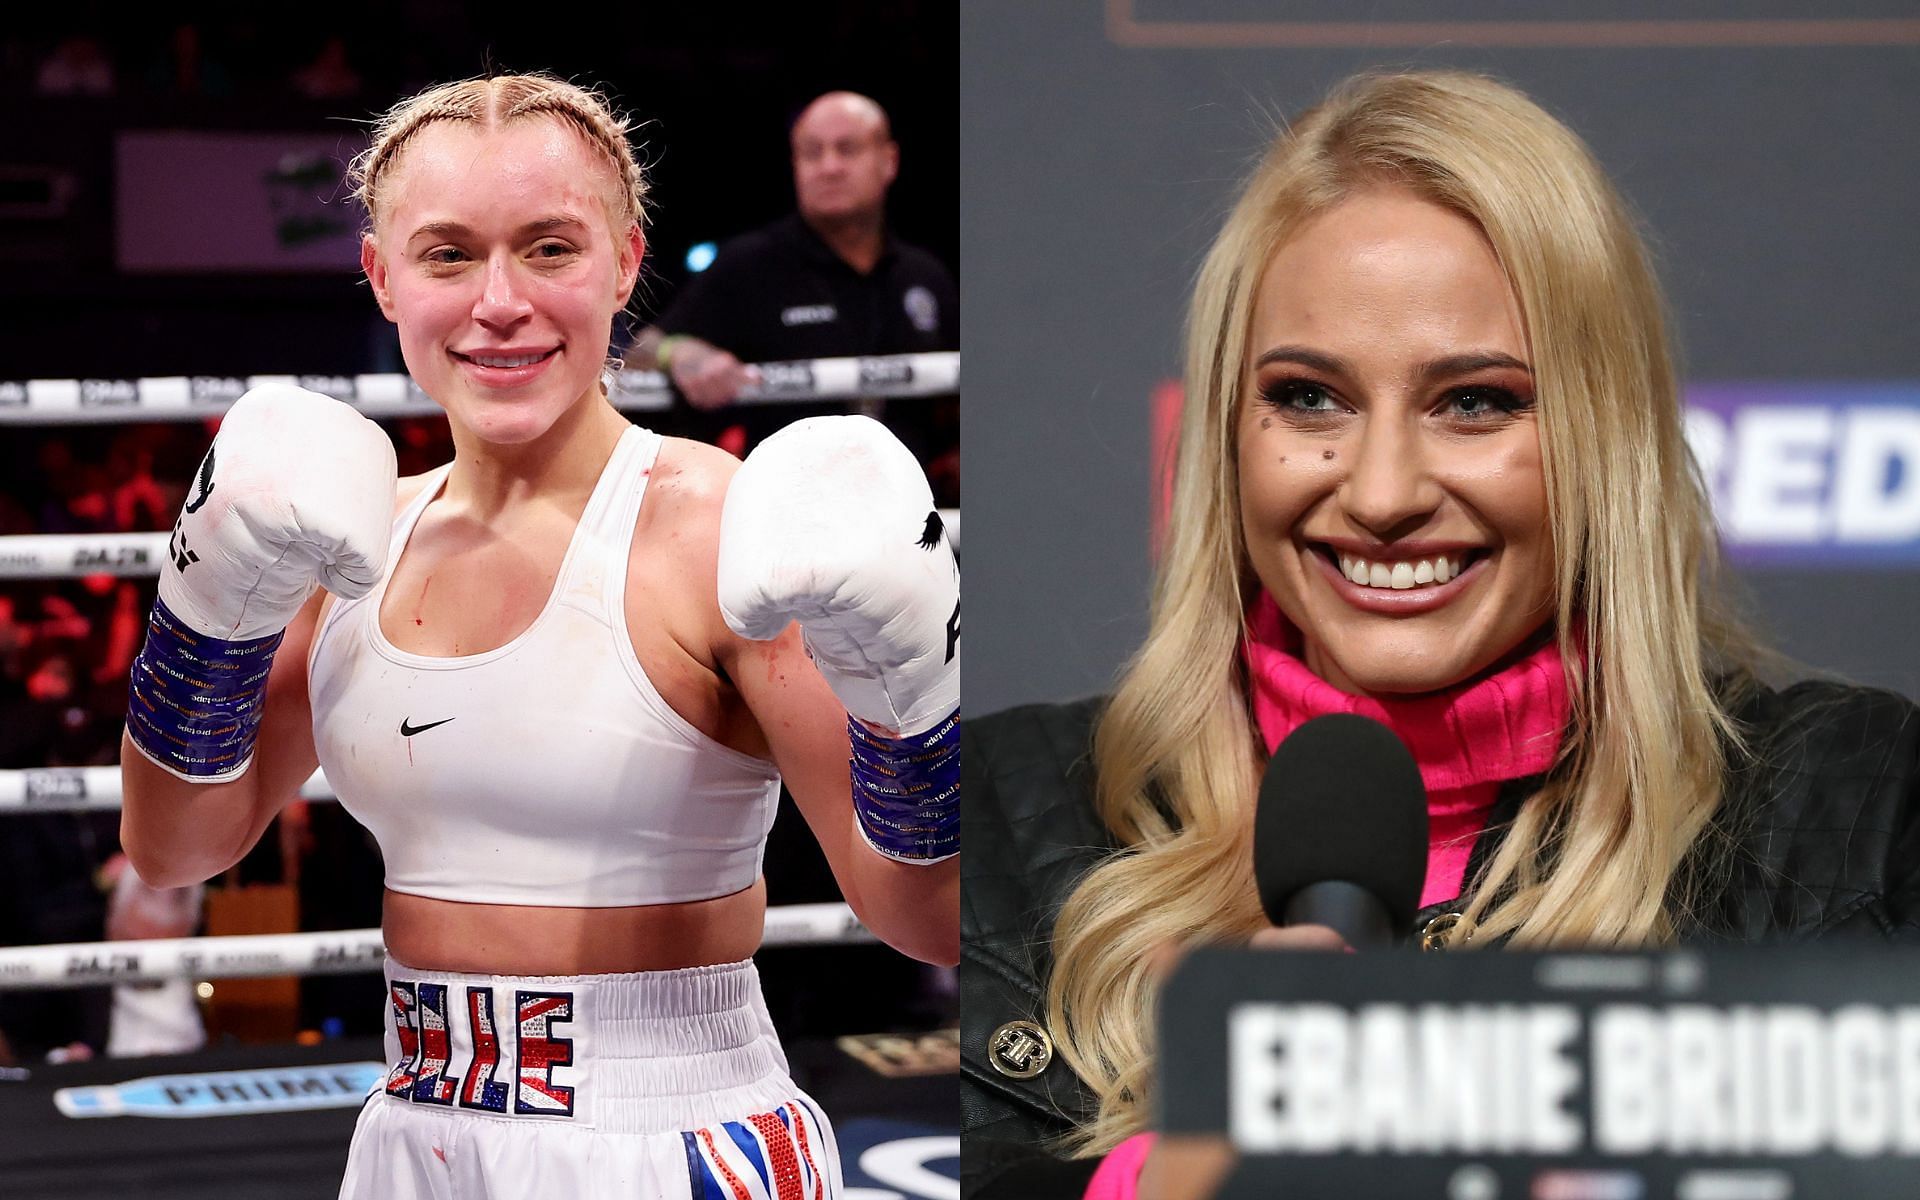 Elle Brooke (left) and Ebanie Bridges (right) have achieved tremendous success in the influencer realm, besides competing in the sport of boxing as well [Images courtesy: Getty Images]